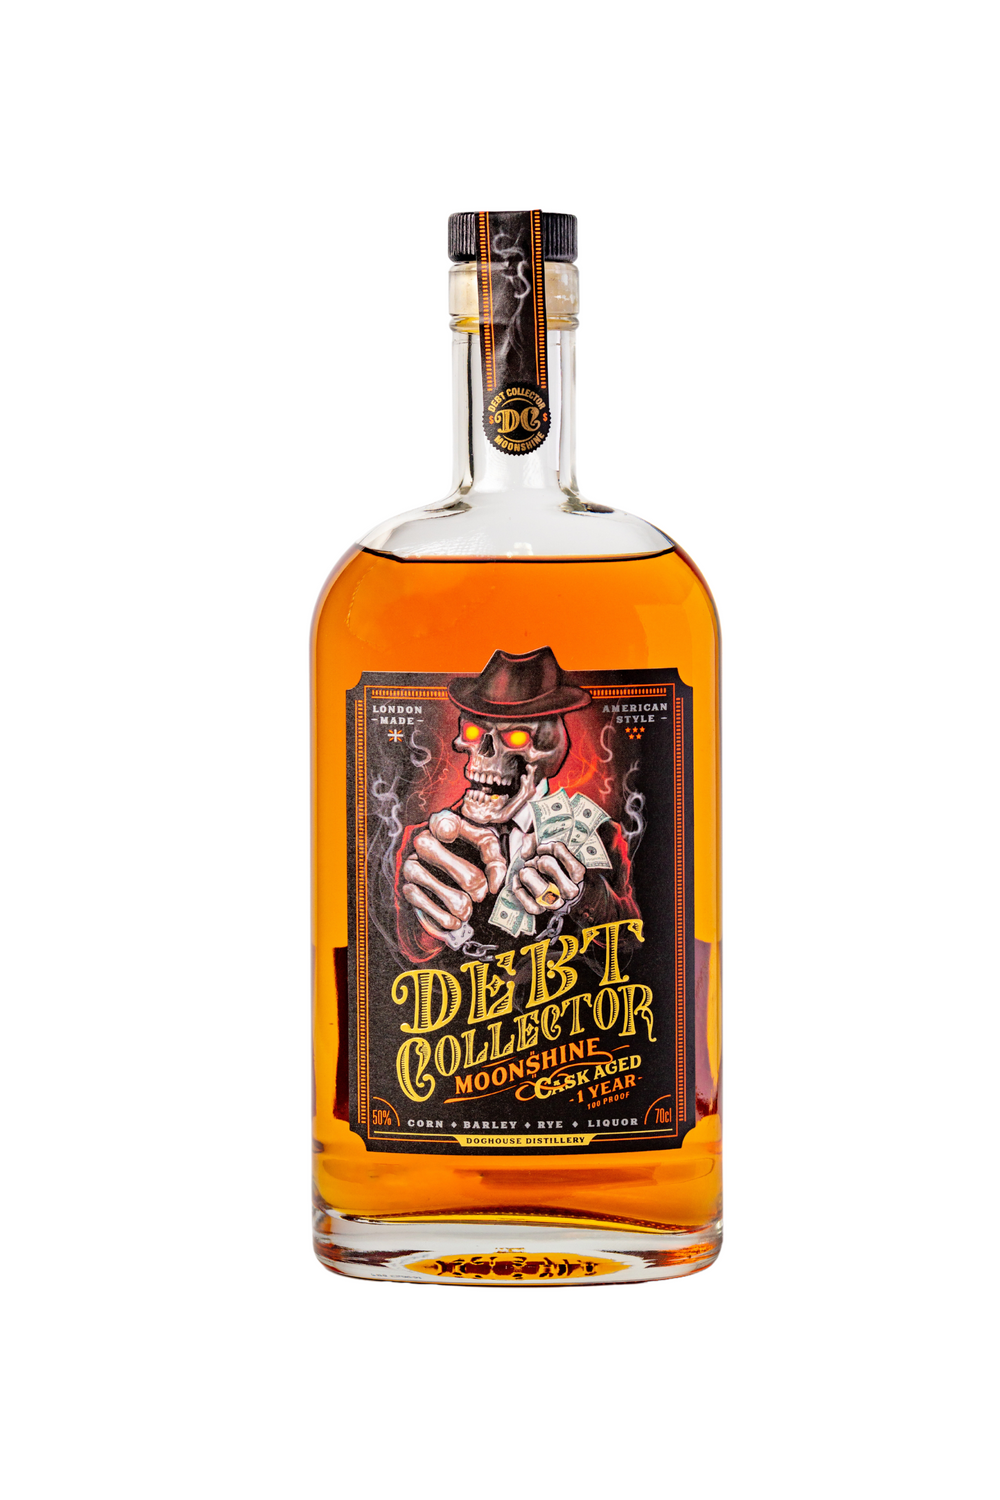 Debt Collector Moonshine Cask Aged 1 Year (70cl)